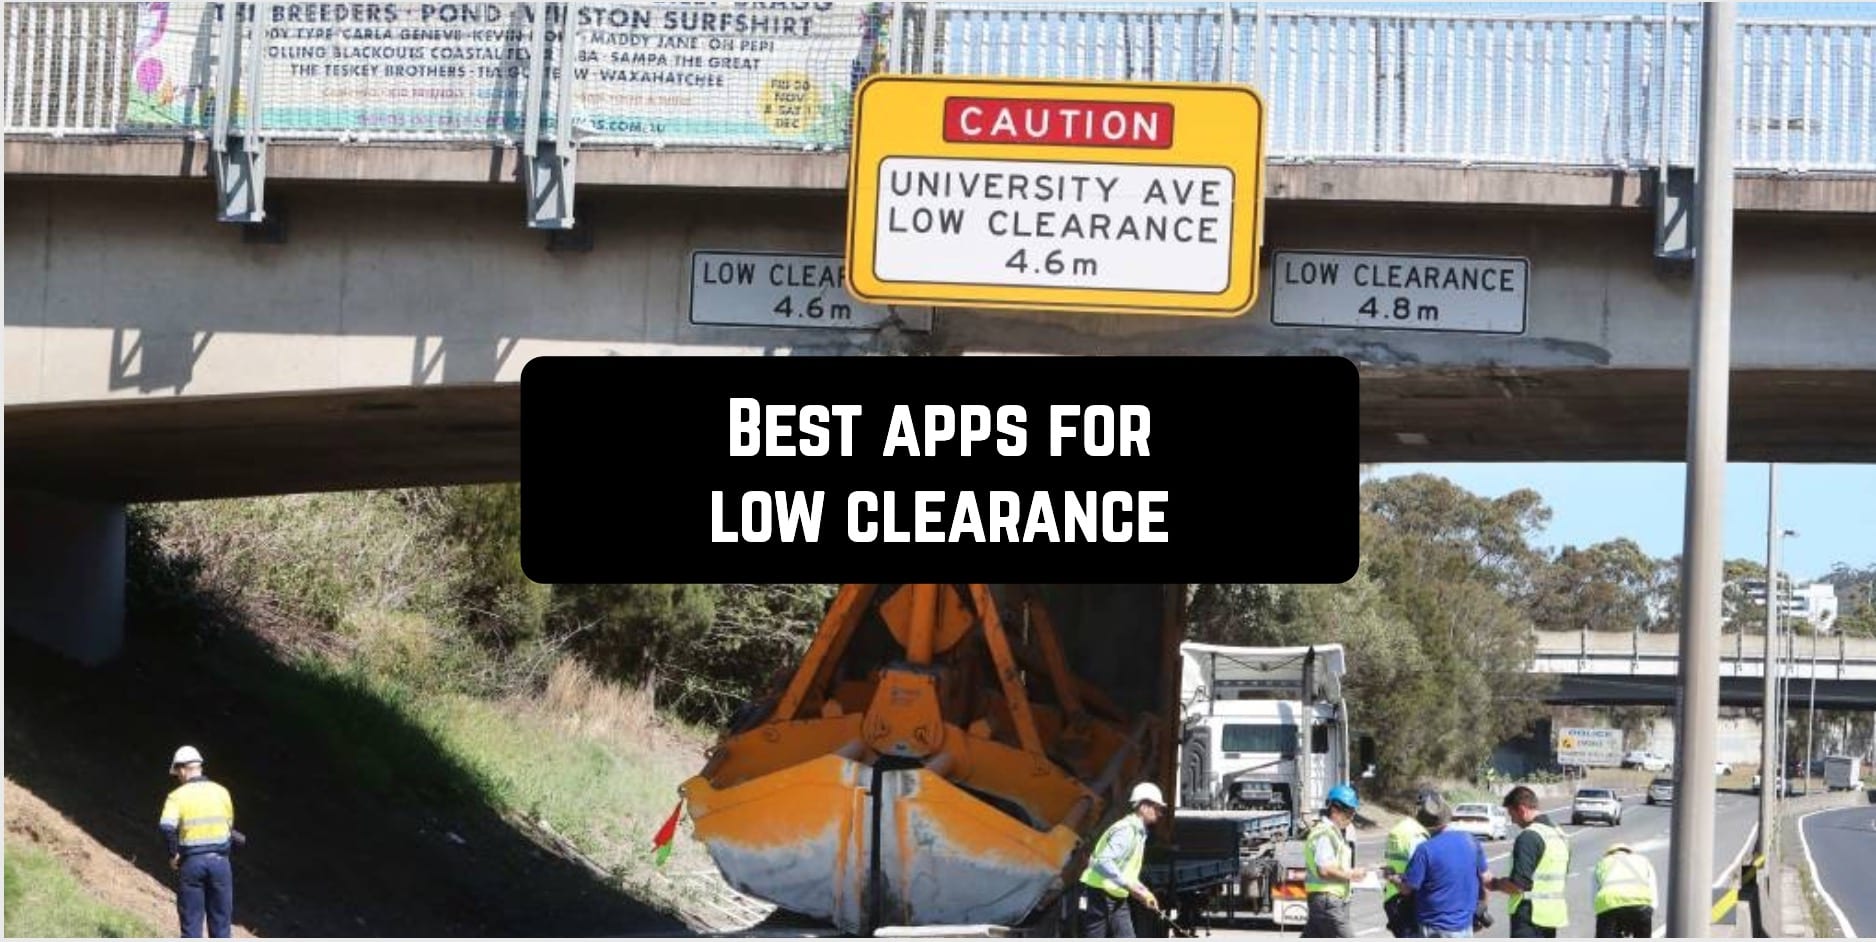 9 Best apps for low clearance (Android & iOS) - App pearl - Best mobile apps for Android & iOS devices